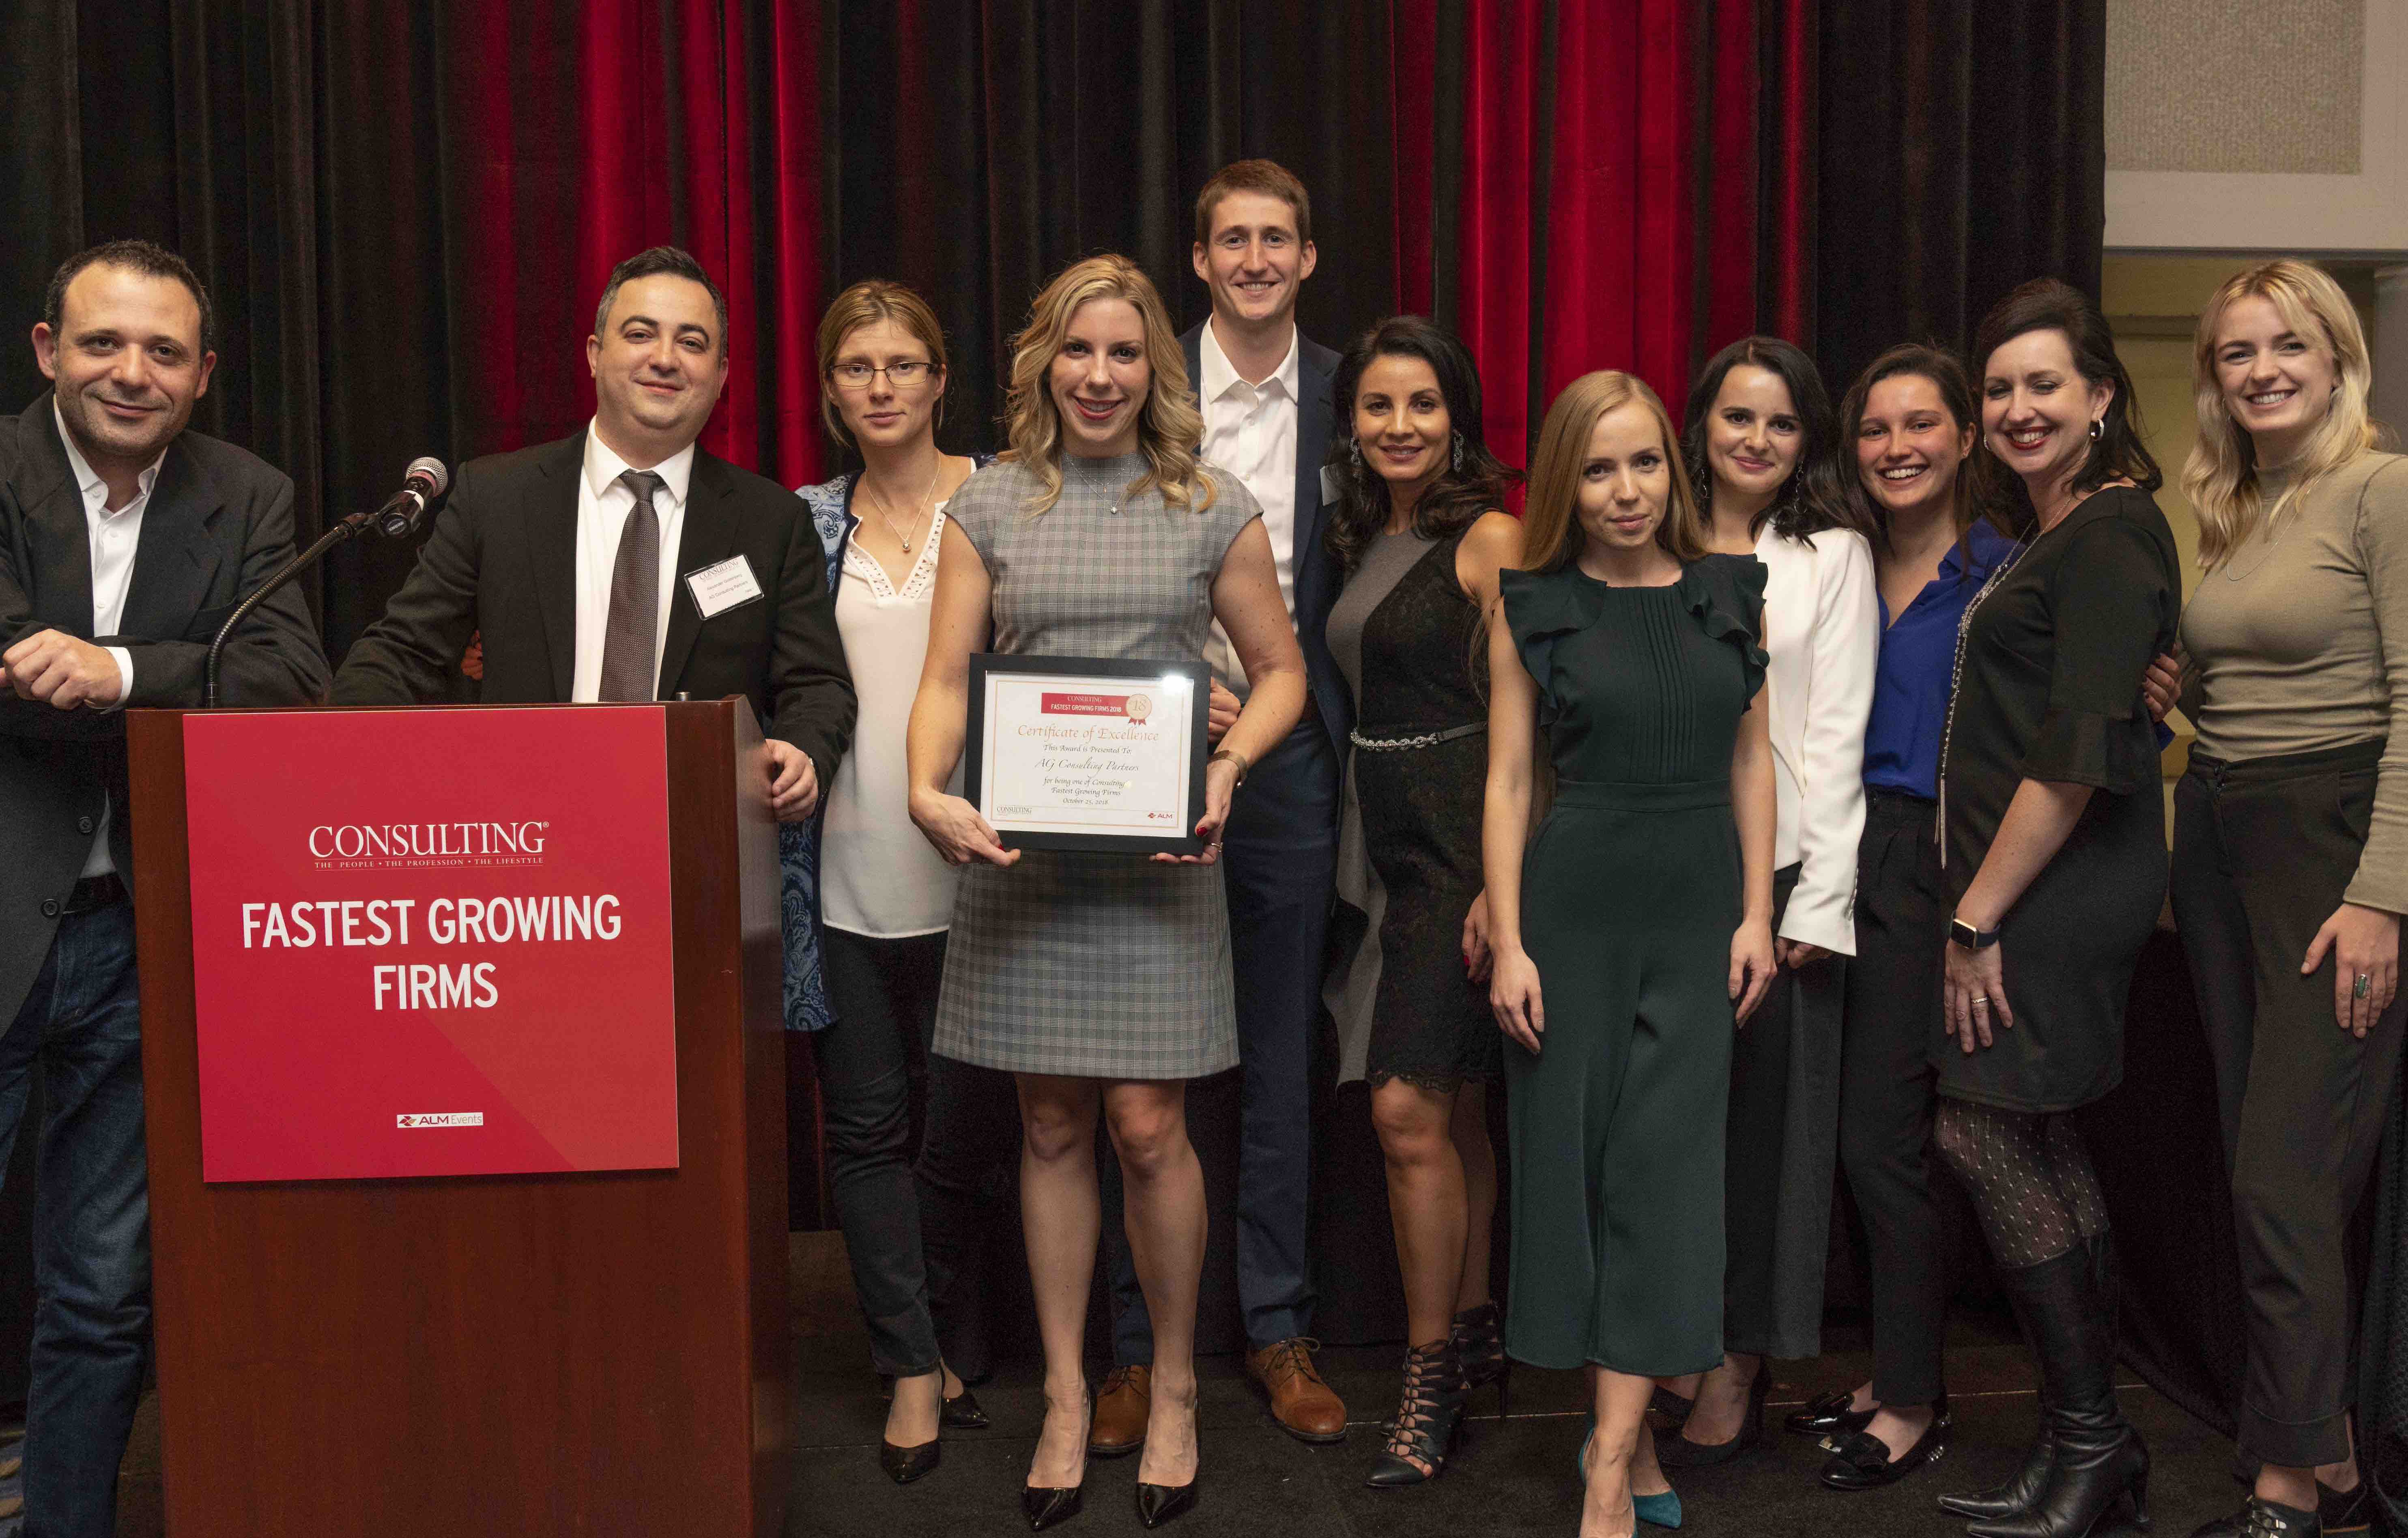 Gala Photos: The 2018 Fastest Growing Firms